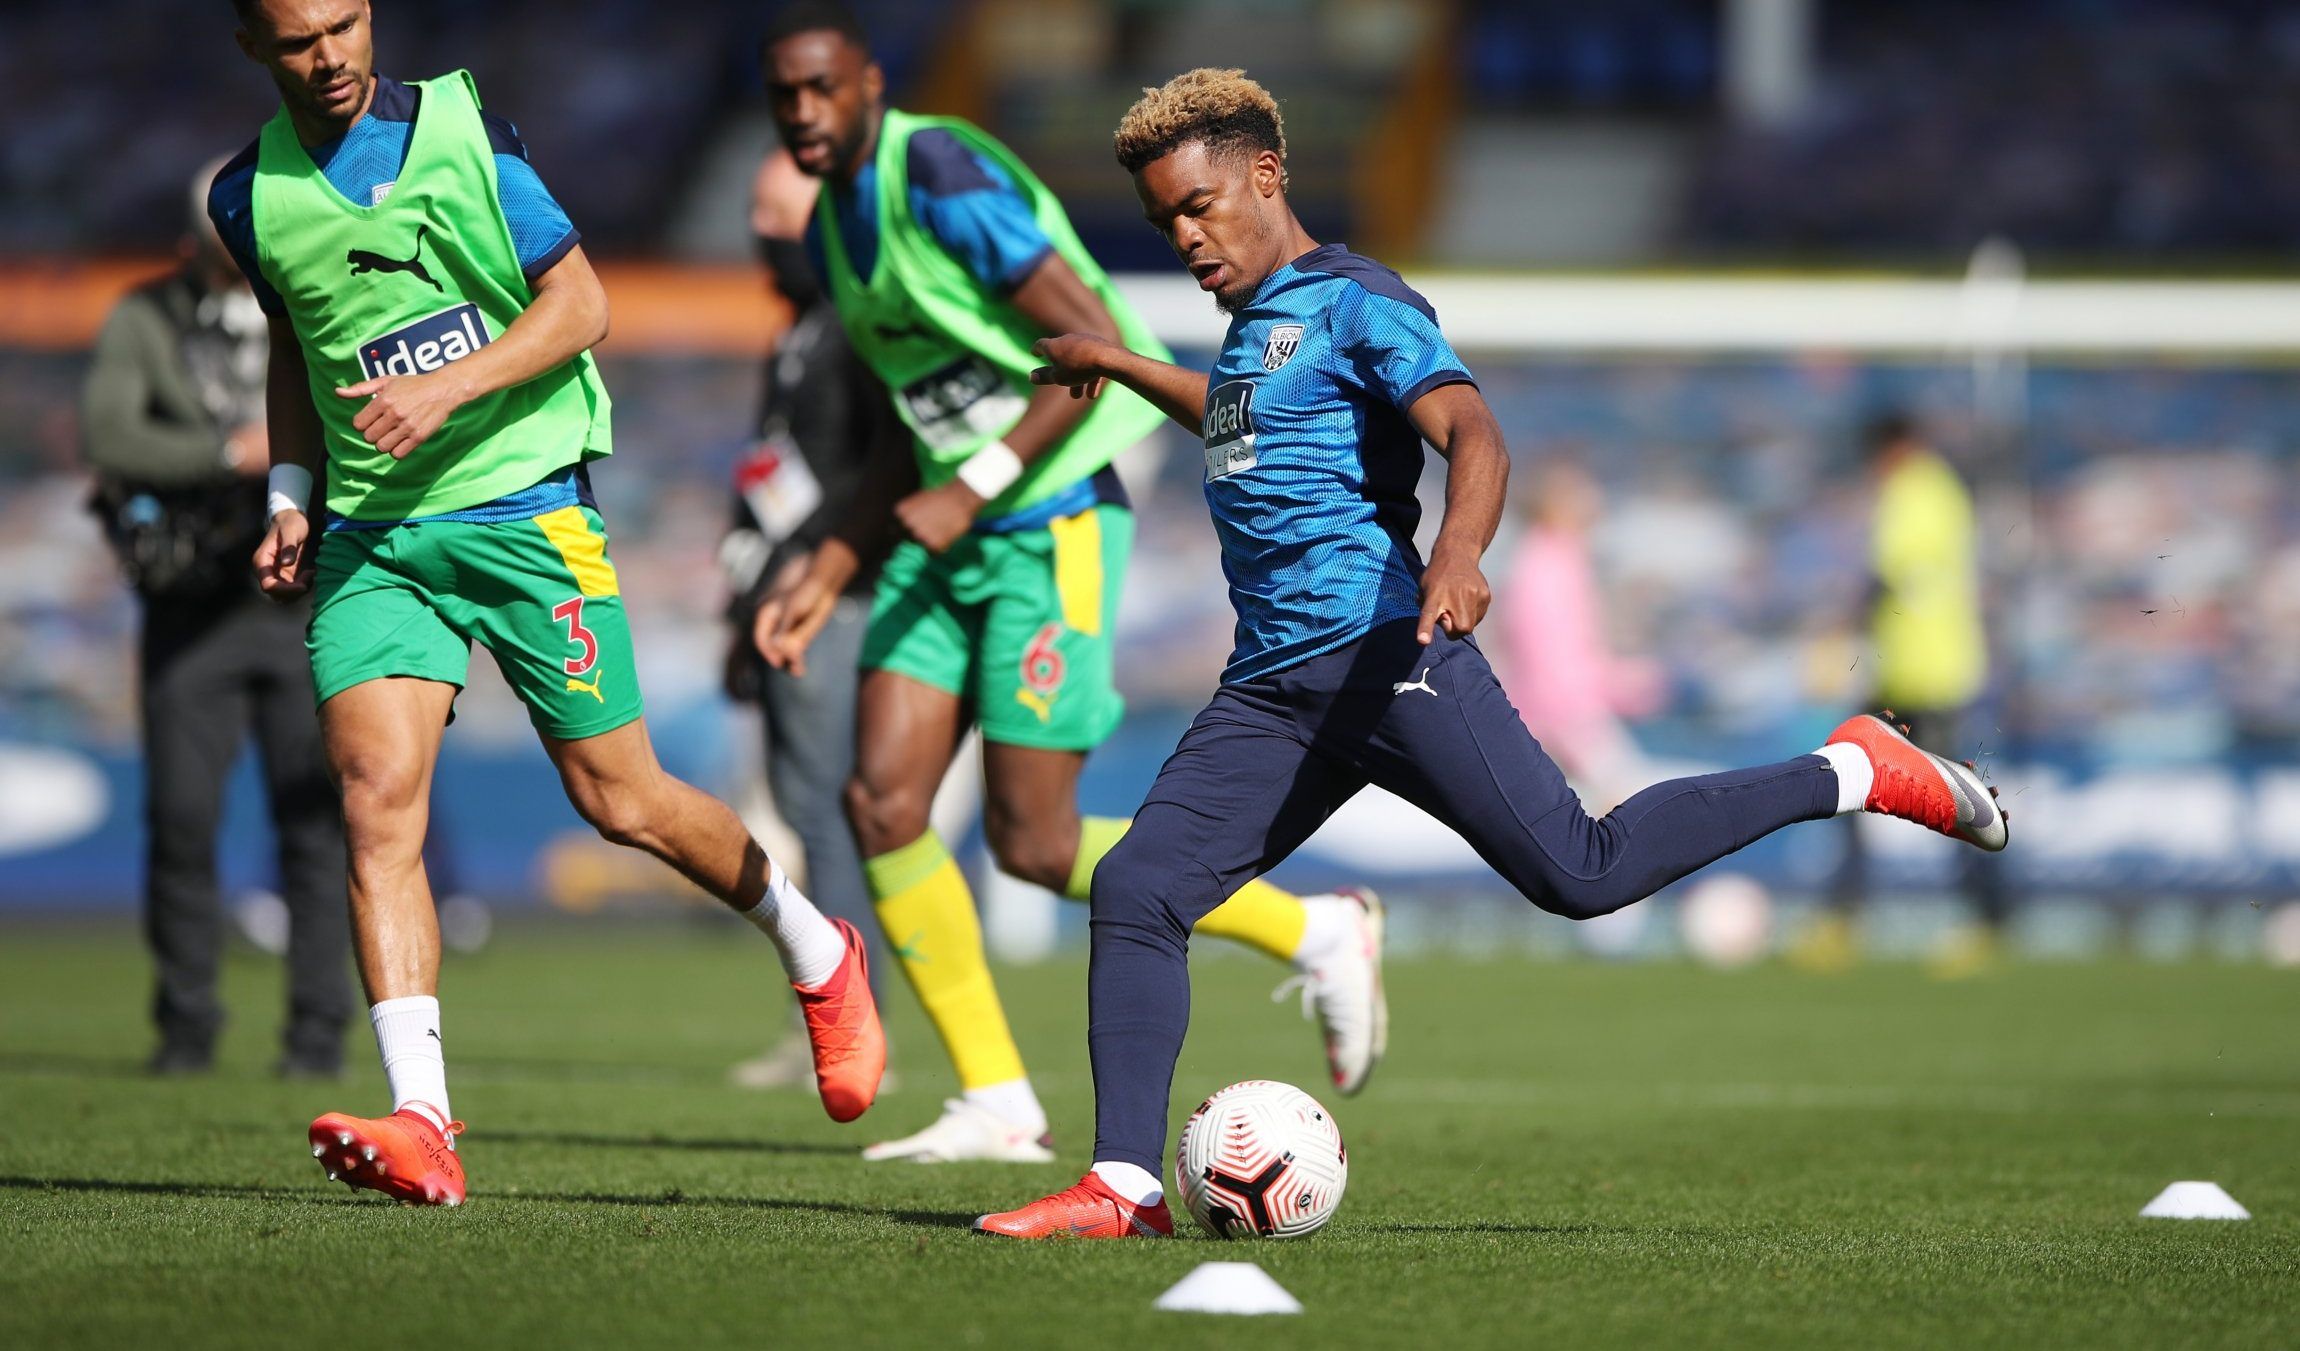 West Brom's Grady Diangana in warm-up vs Everton